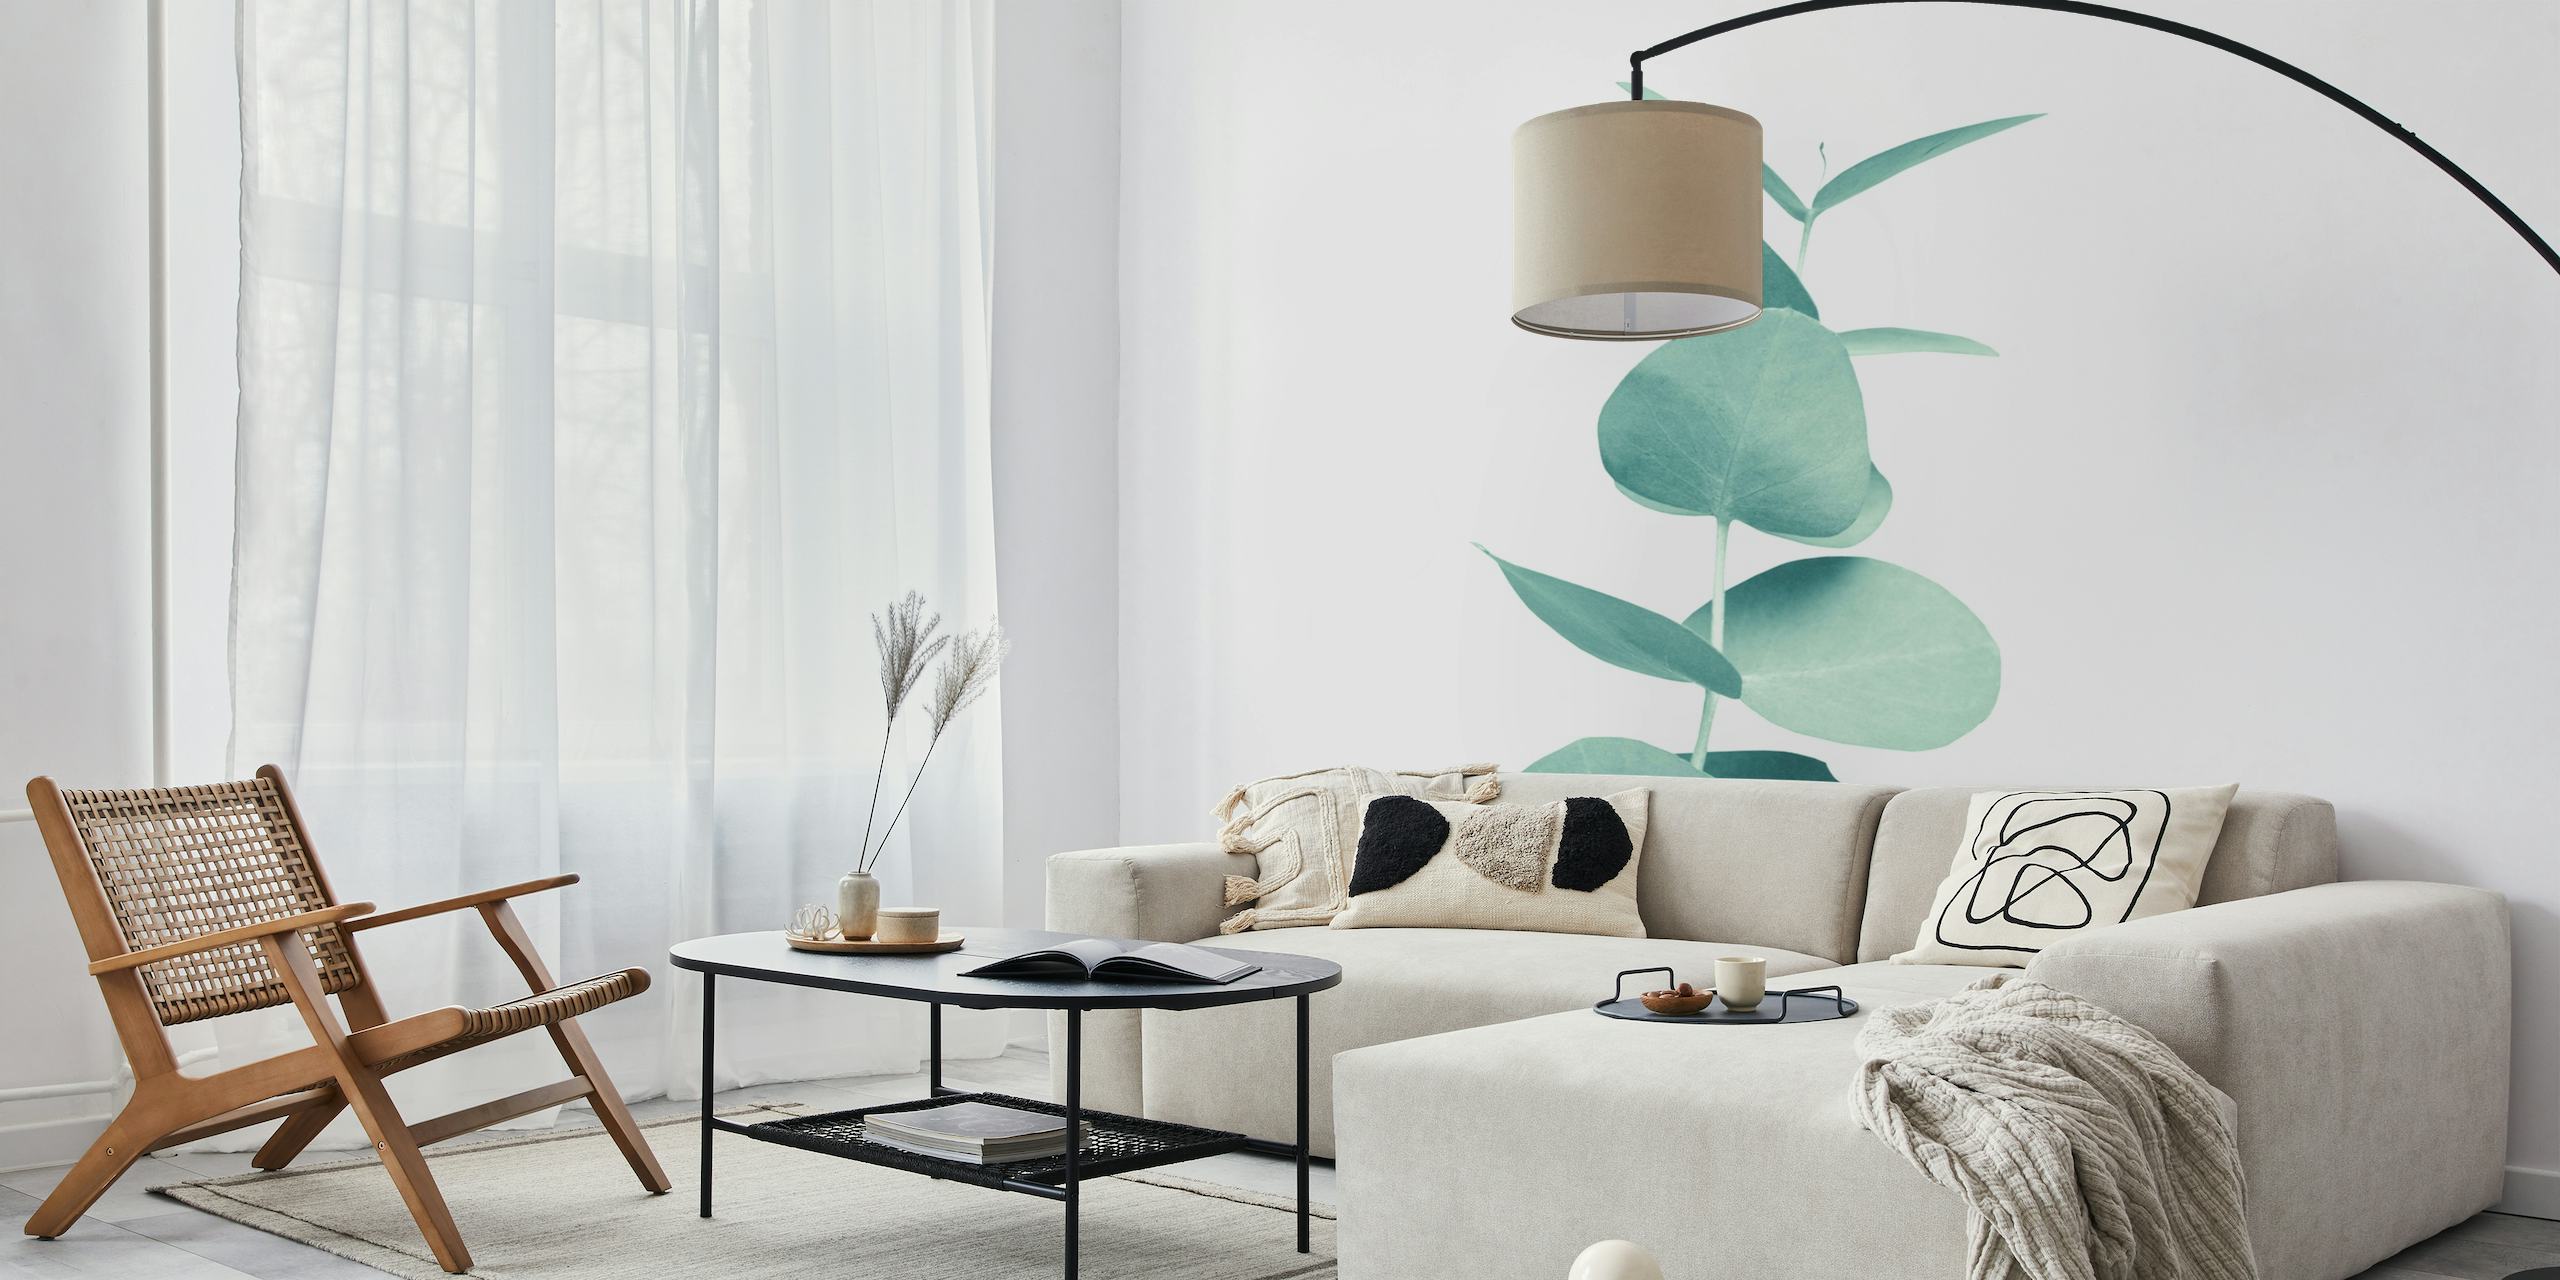 Simplistic eucalyptus branch wall mural with soft green tones